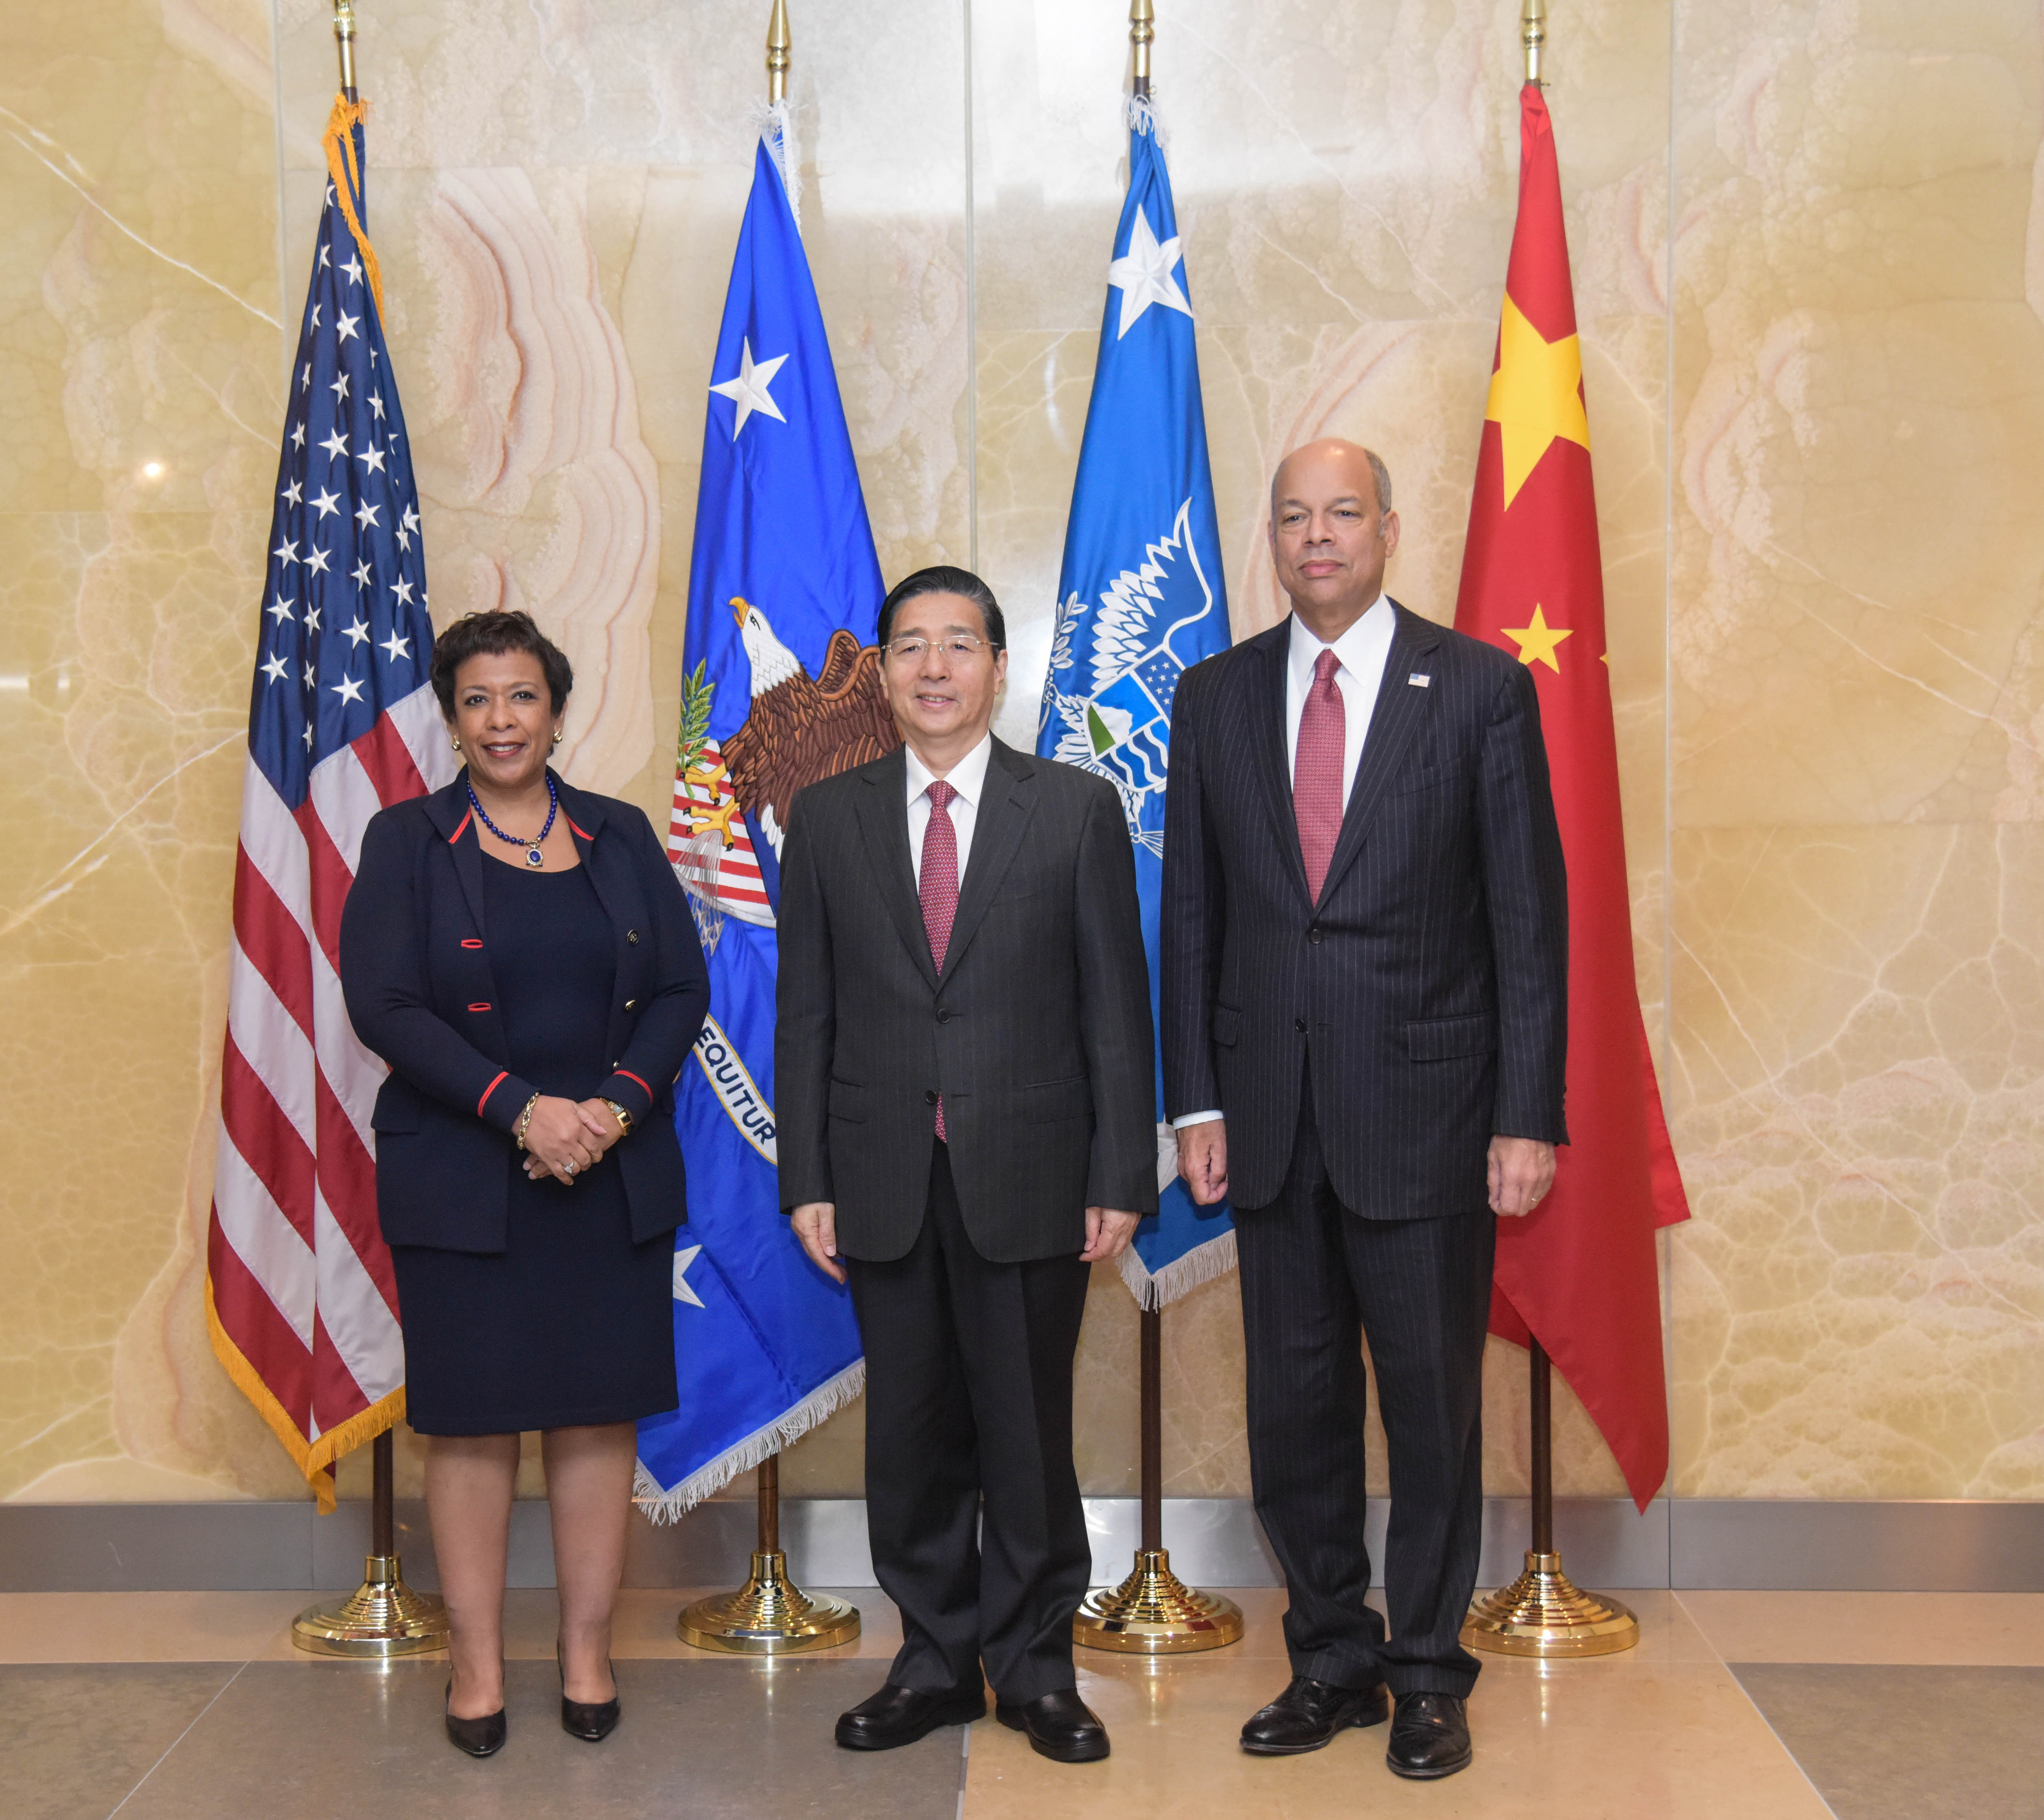 (151201) -- WASHINGTON D.C., Dec. 1, 2015 (Xinhua) -- China's State Councilor and Minister of Public Security Guo Shengkun (C), U.S. Attorney General Loretta Lynch (L) and Secretary of Homeland Security Jeh Johnson pose for photos during the first China-U.S. ministerial dialogue on fighting cyber crimes in Washinton D.C., the United States, on Dec. 1, 2015. The first China-U.S. ministerial dialogue on fighting cyber crimes held here Tuesday yielded positive outcomes as the two sides worked hard to remove one of the major stumbling blocks to the development of the bilateral ties. (Xinhua/Bao Dandan) 